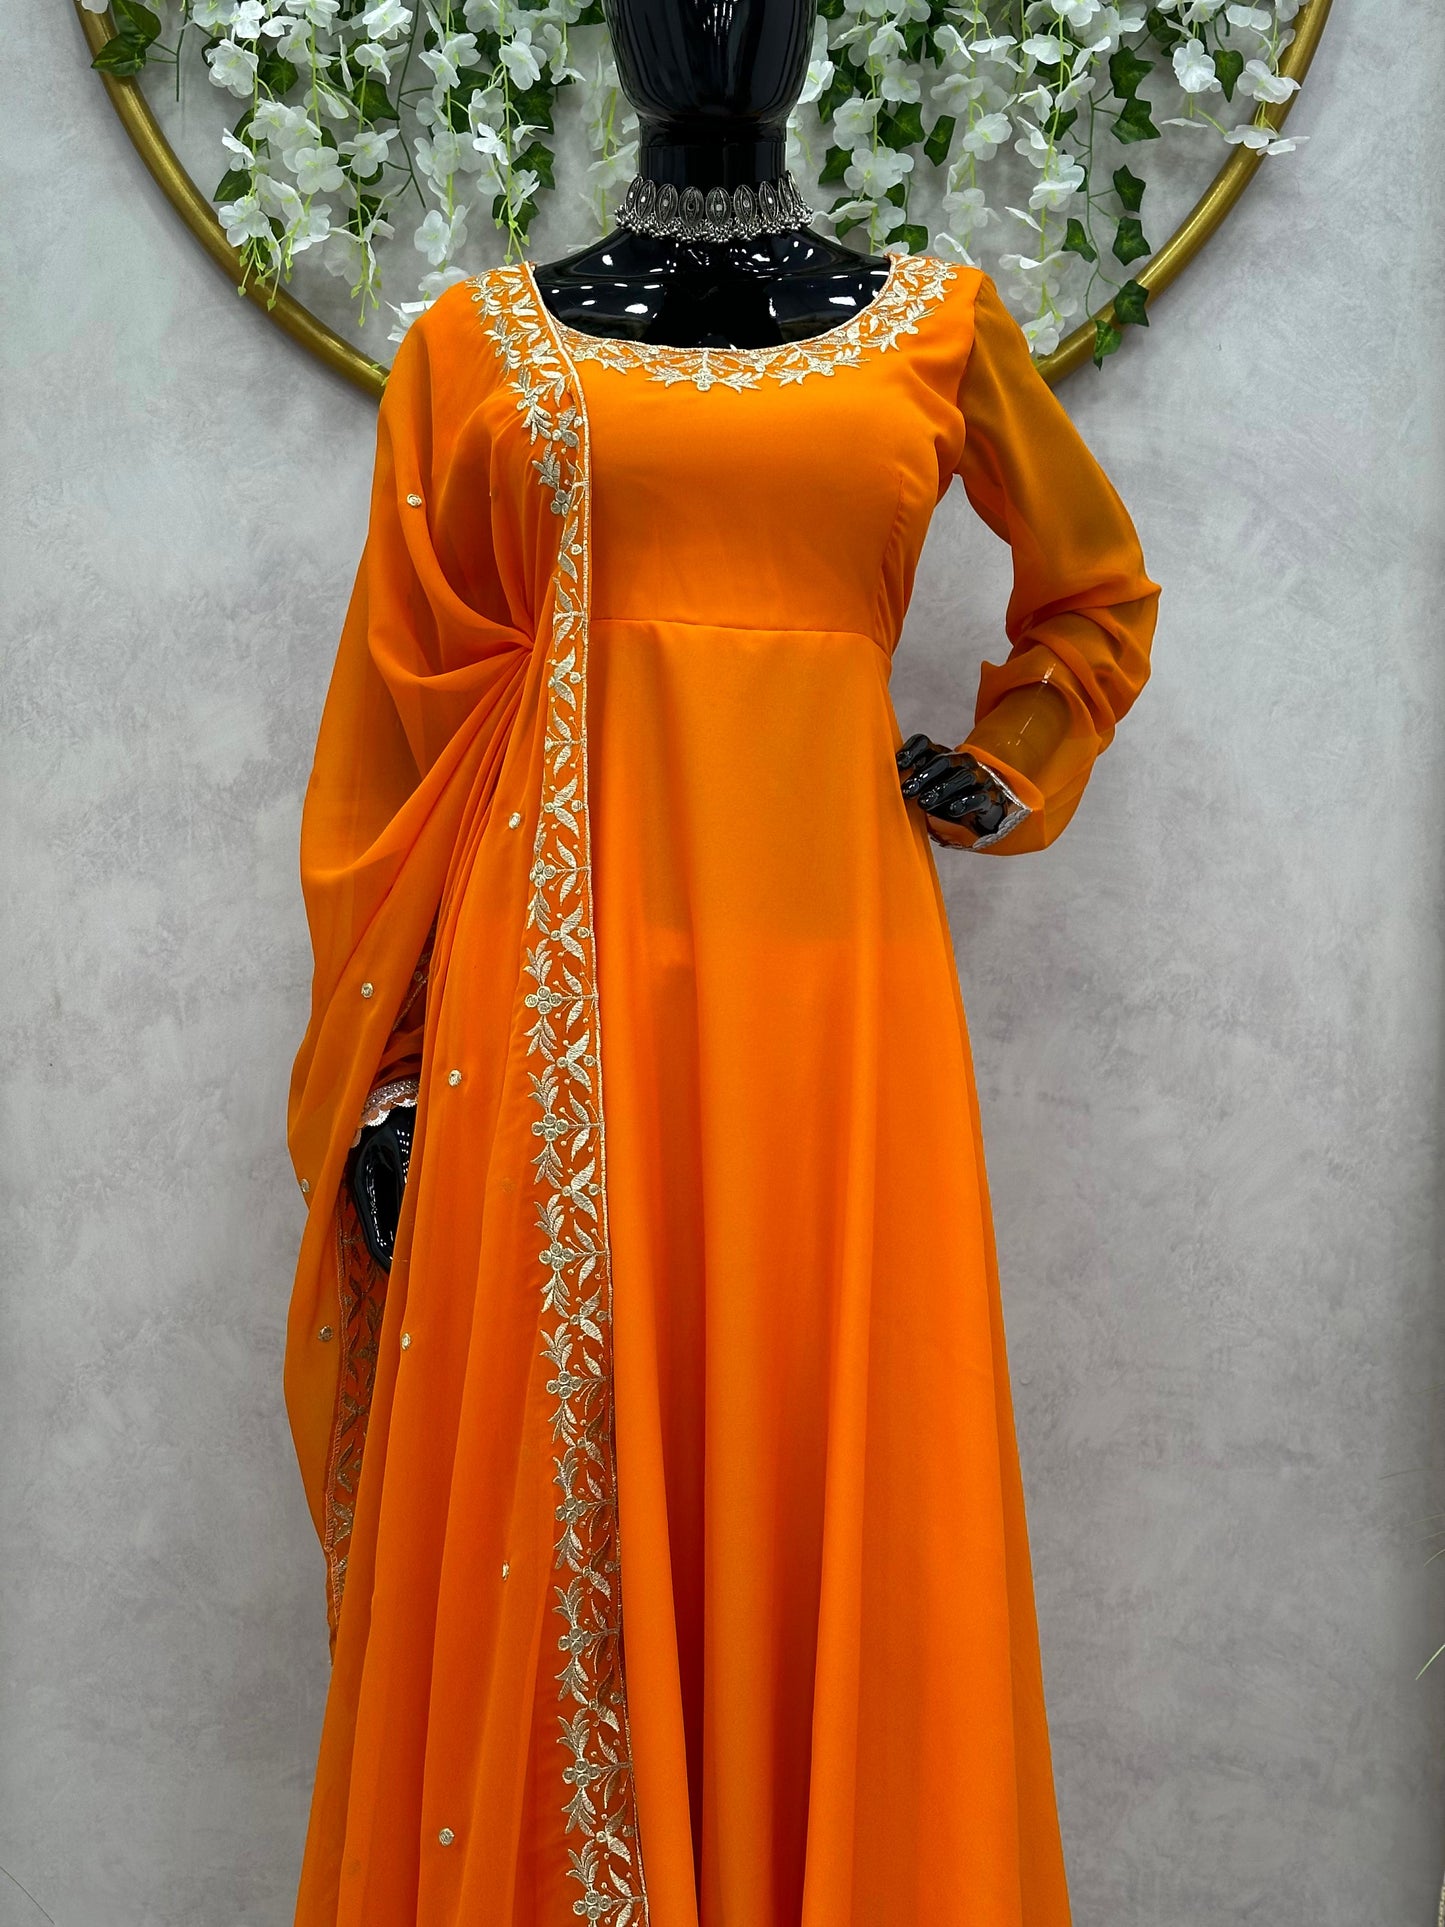 Experience Luxury: Naira Cut Suit Set with Intricate Thred Work"